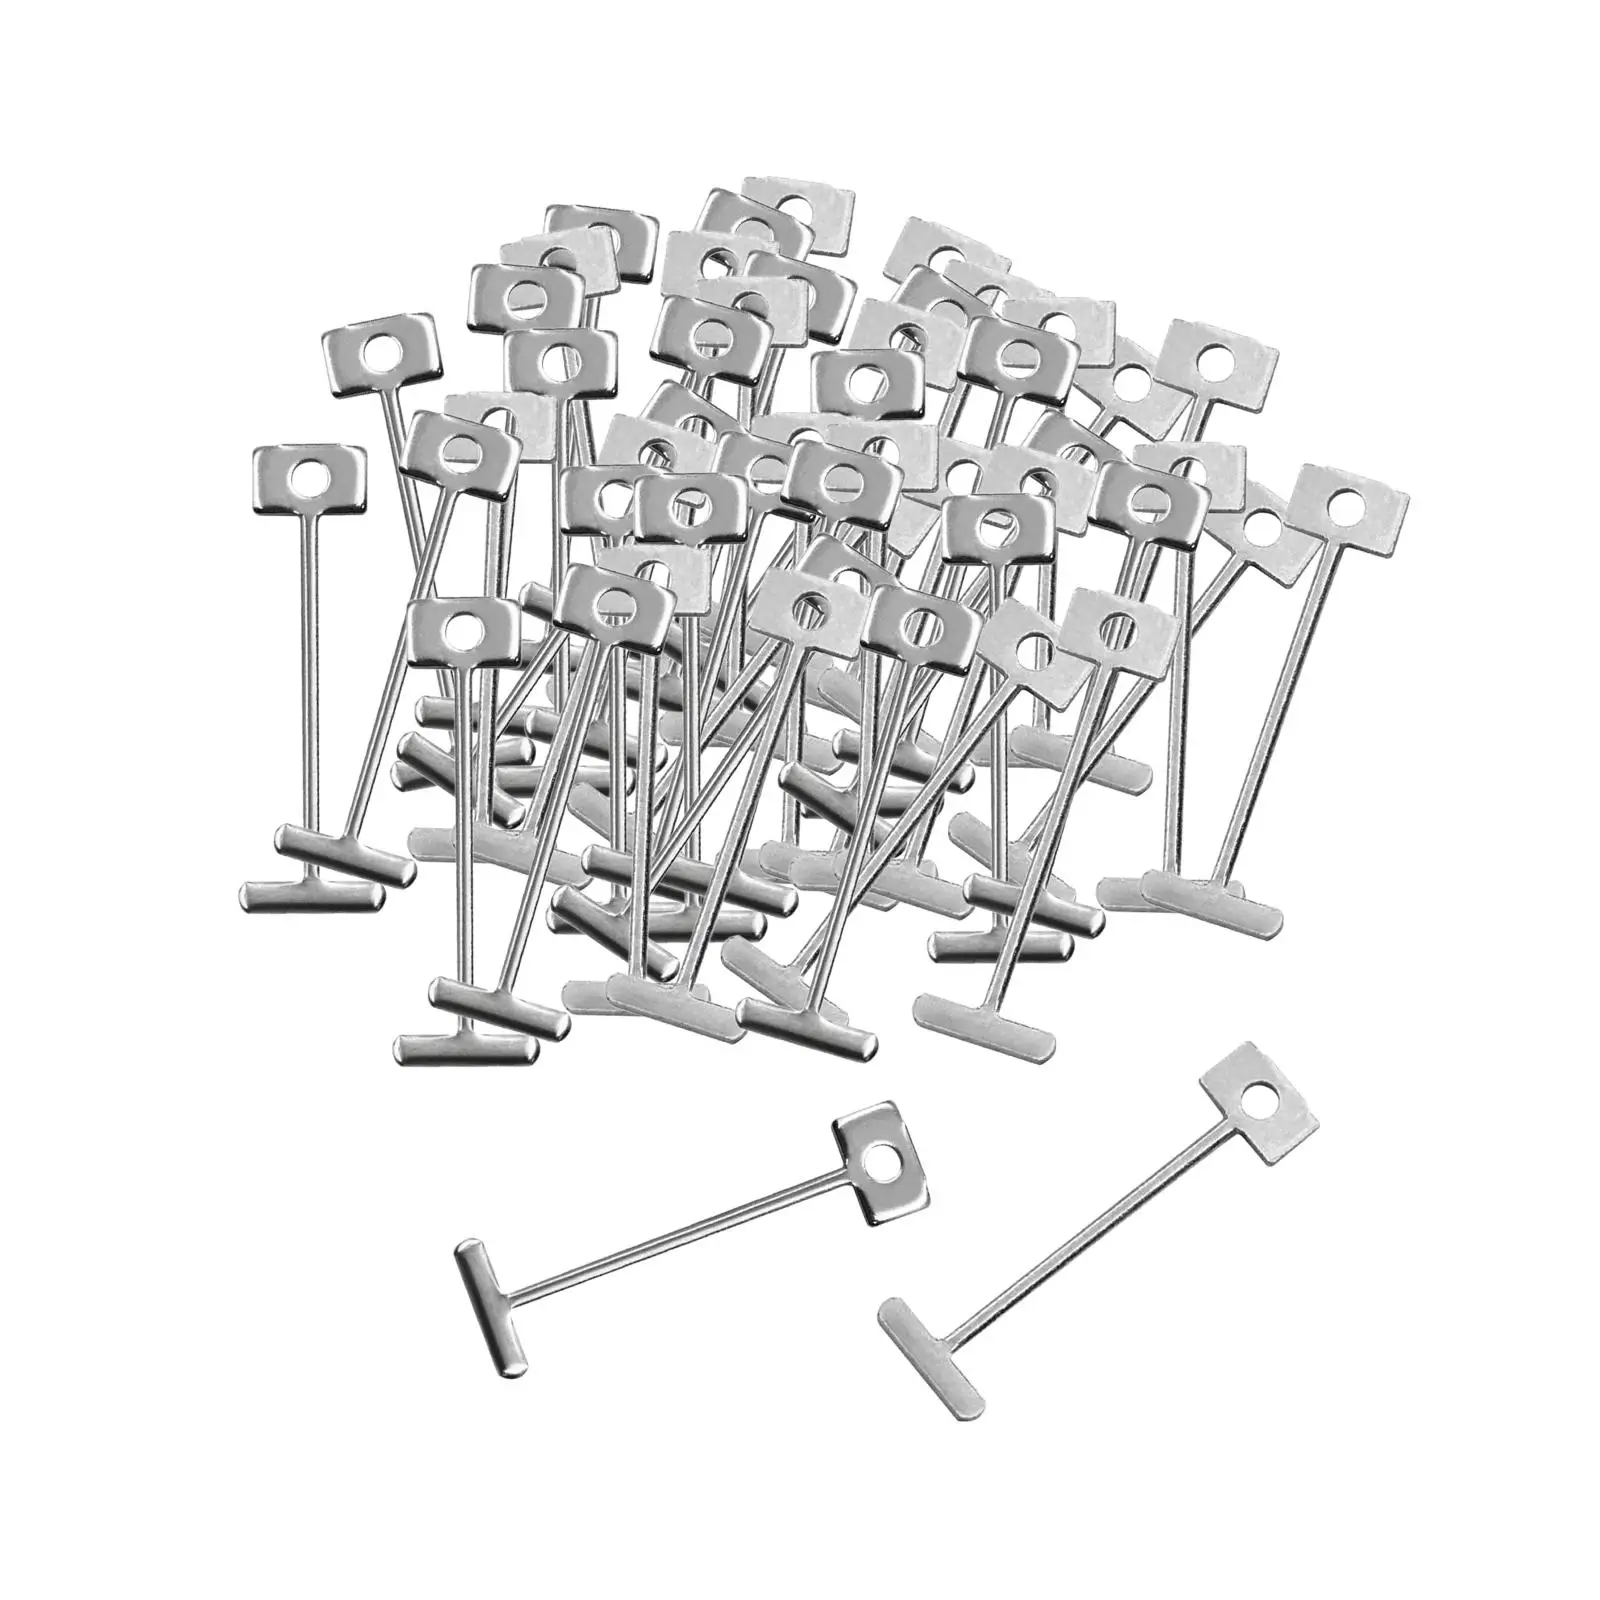 50pcs Steel T-Pins Tile Leveling System for Building Walls And Floors